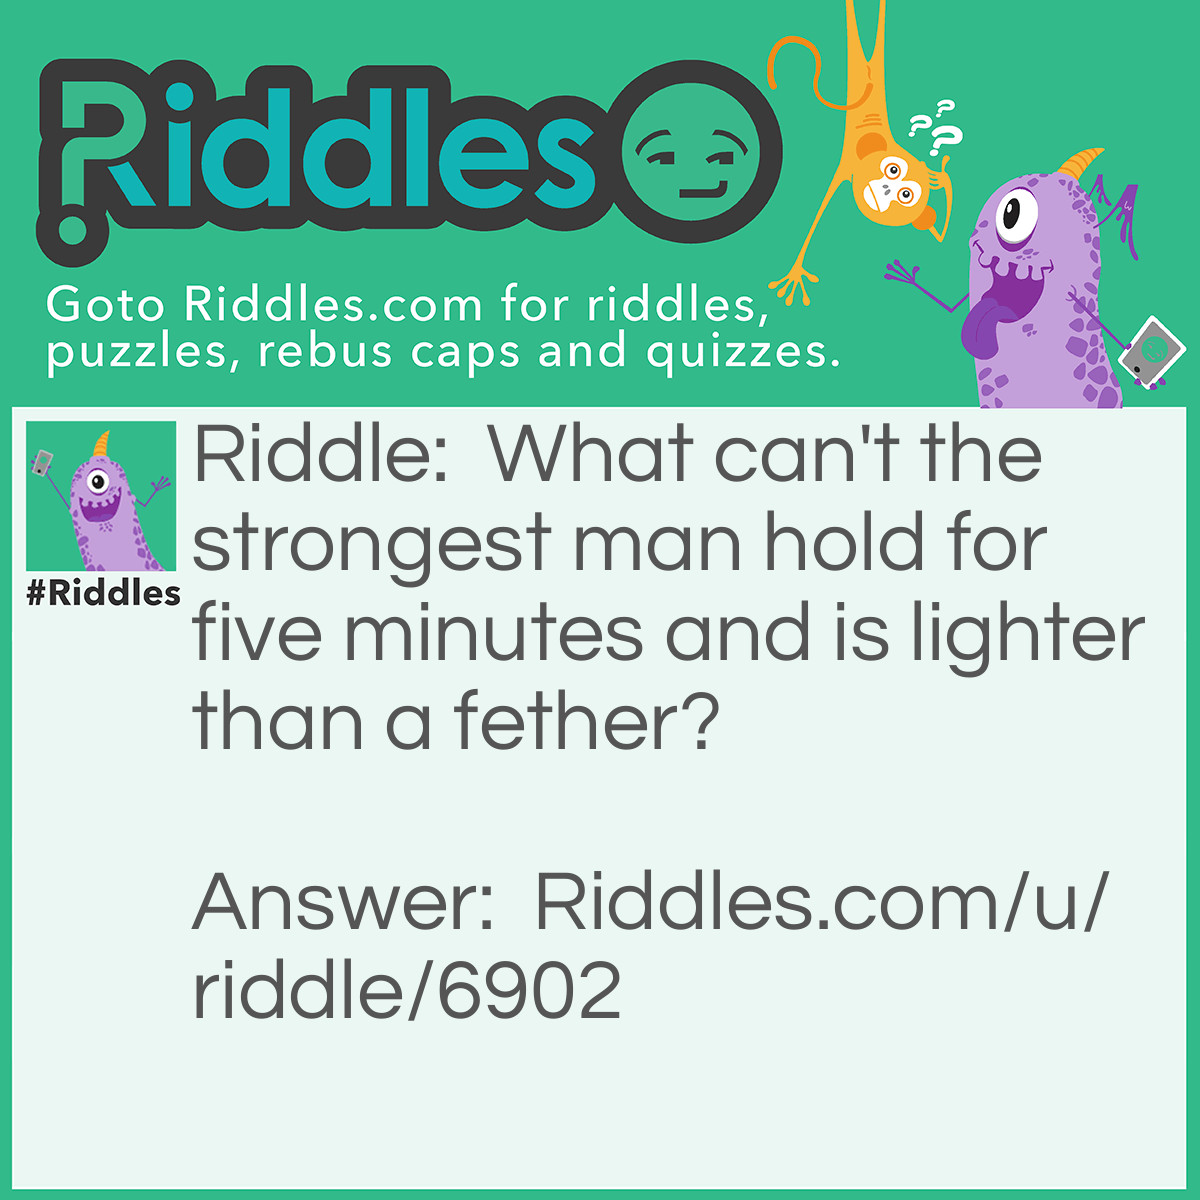 Riddle: What can't the strongest man hold for five minutes and is lighter than a fether? Answer: His breath.